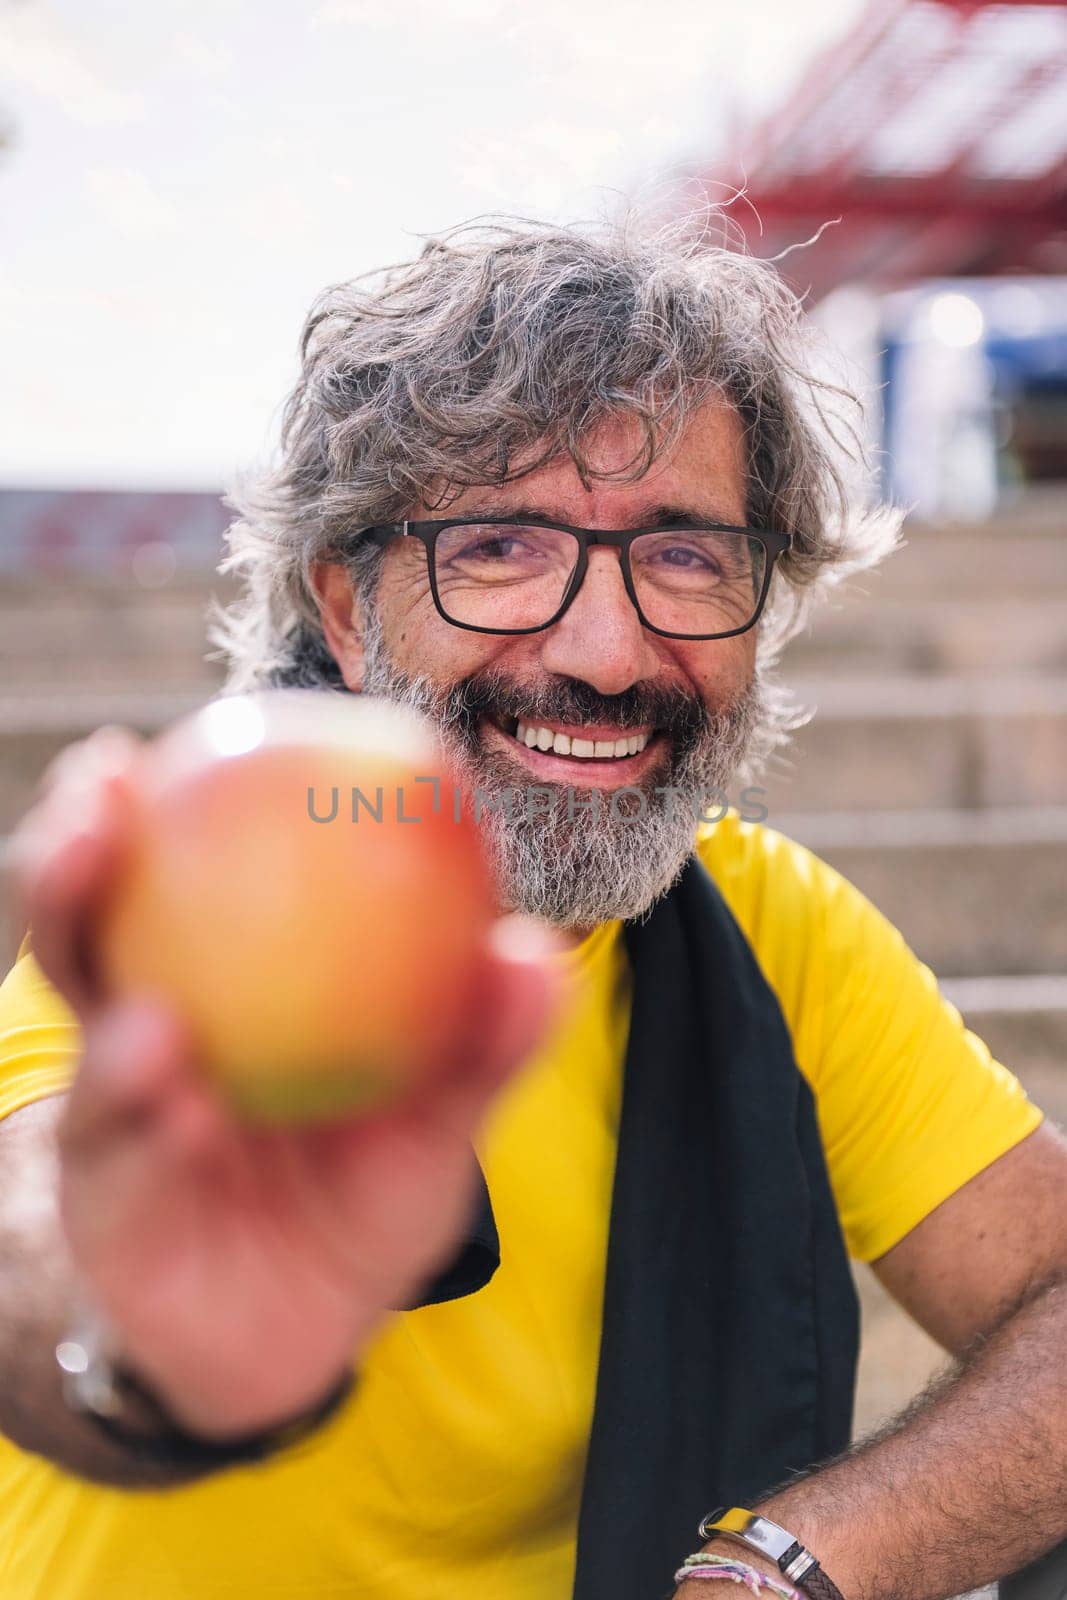 senior sports man showing an apple after workout by raulmelldo